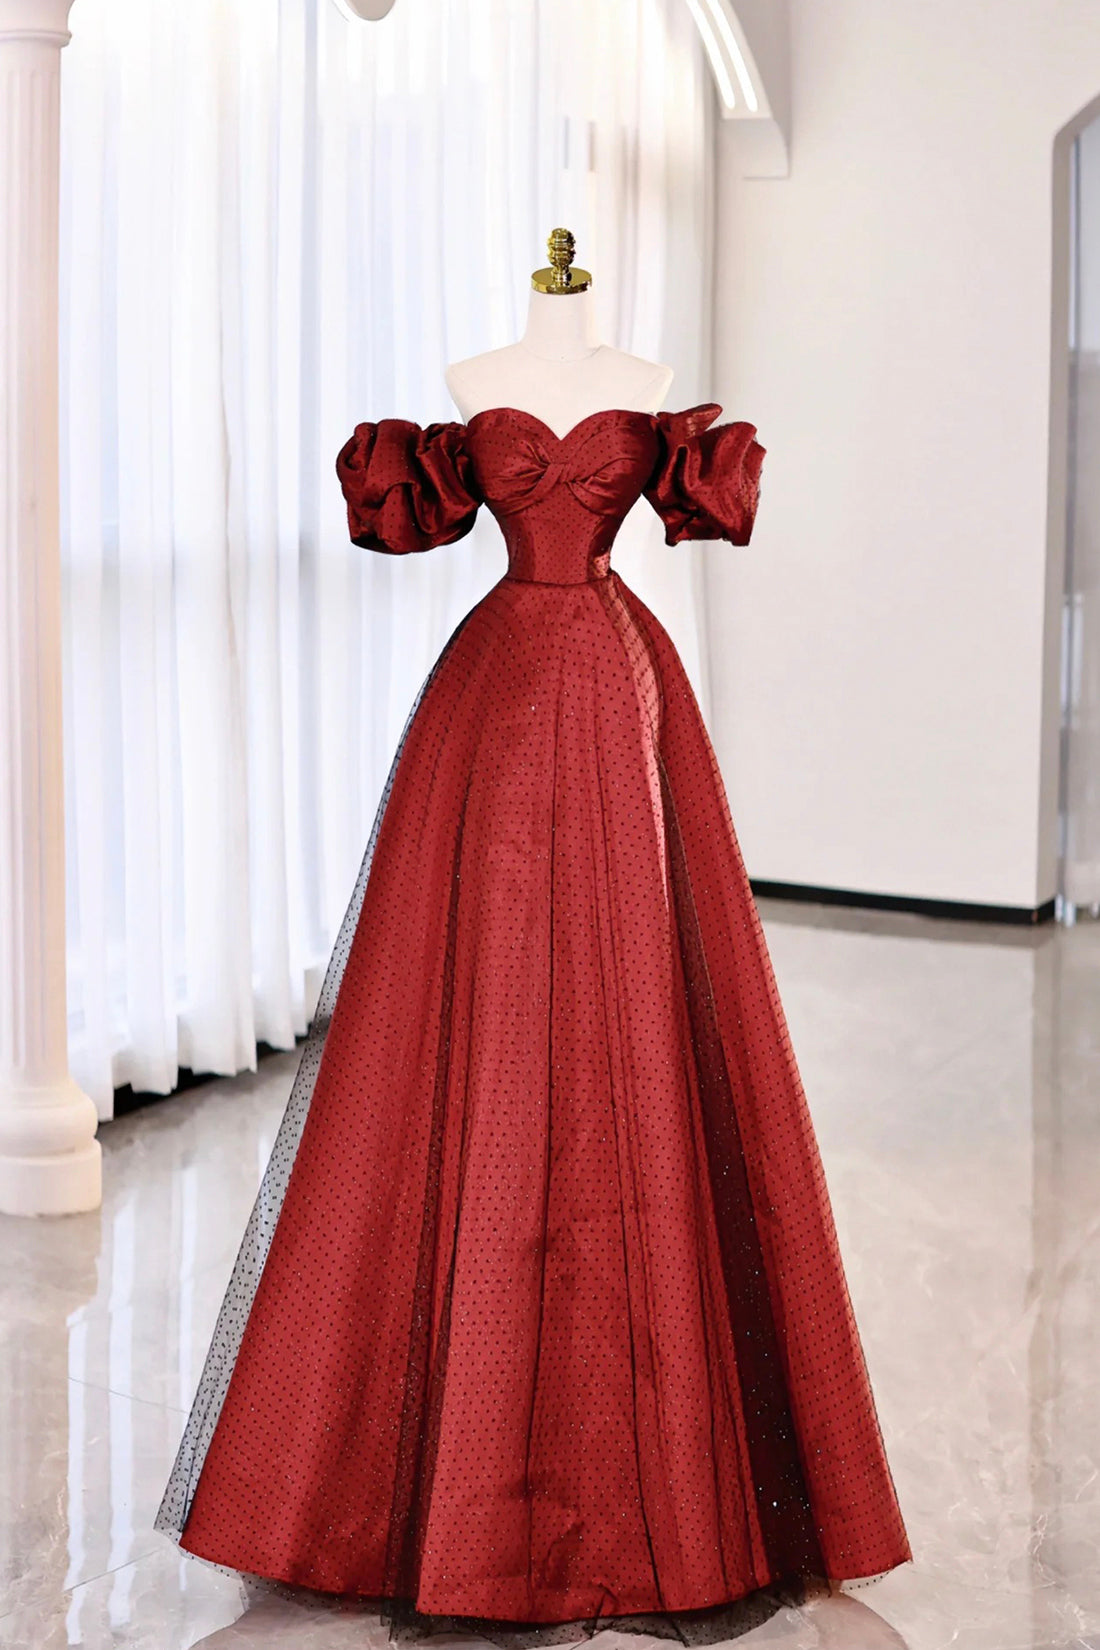 Burgundy Satin Tulle Long Prom Dress Outfits For Girls, Off the Shoulder Evening Party Dress